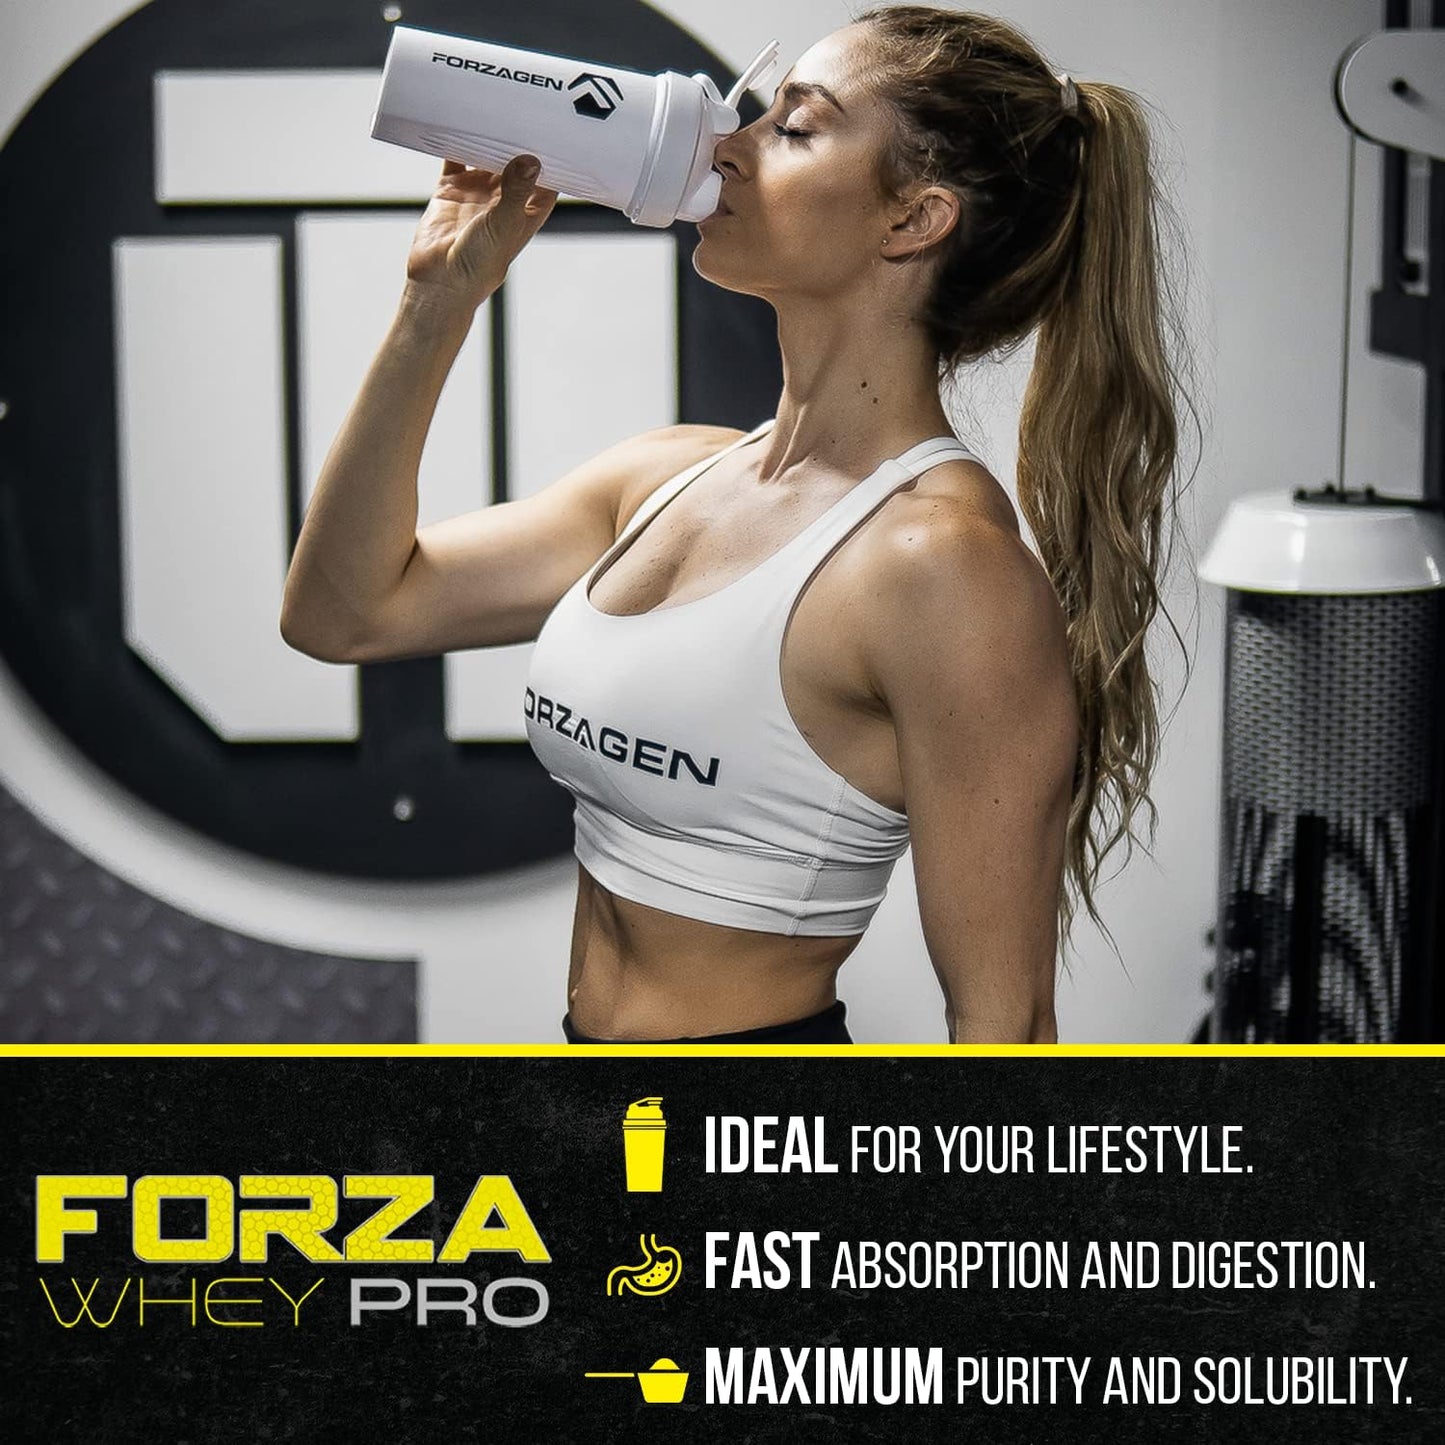 Forzagen Low Carb Whey Protein Powder Chocolate Flavored, Lean Protein Powder 5lbs for Men & Women, 24G of Protein, No Sugar Added, Proteina Whey Protein Chocolate 5 Pounds